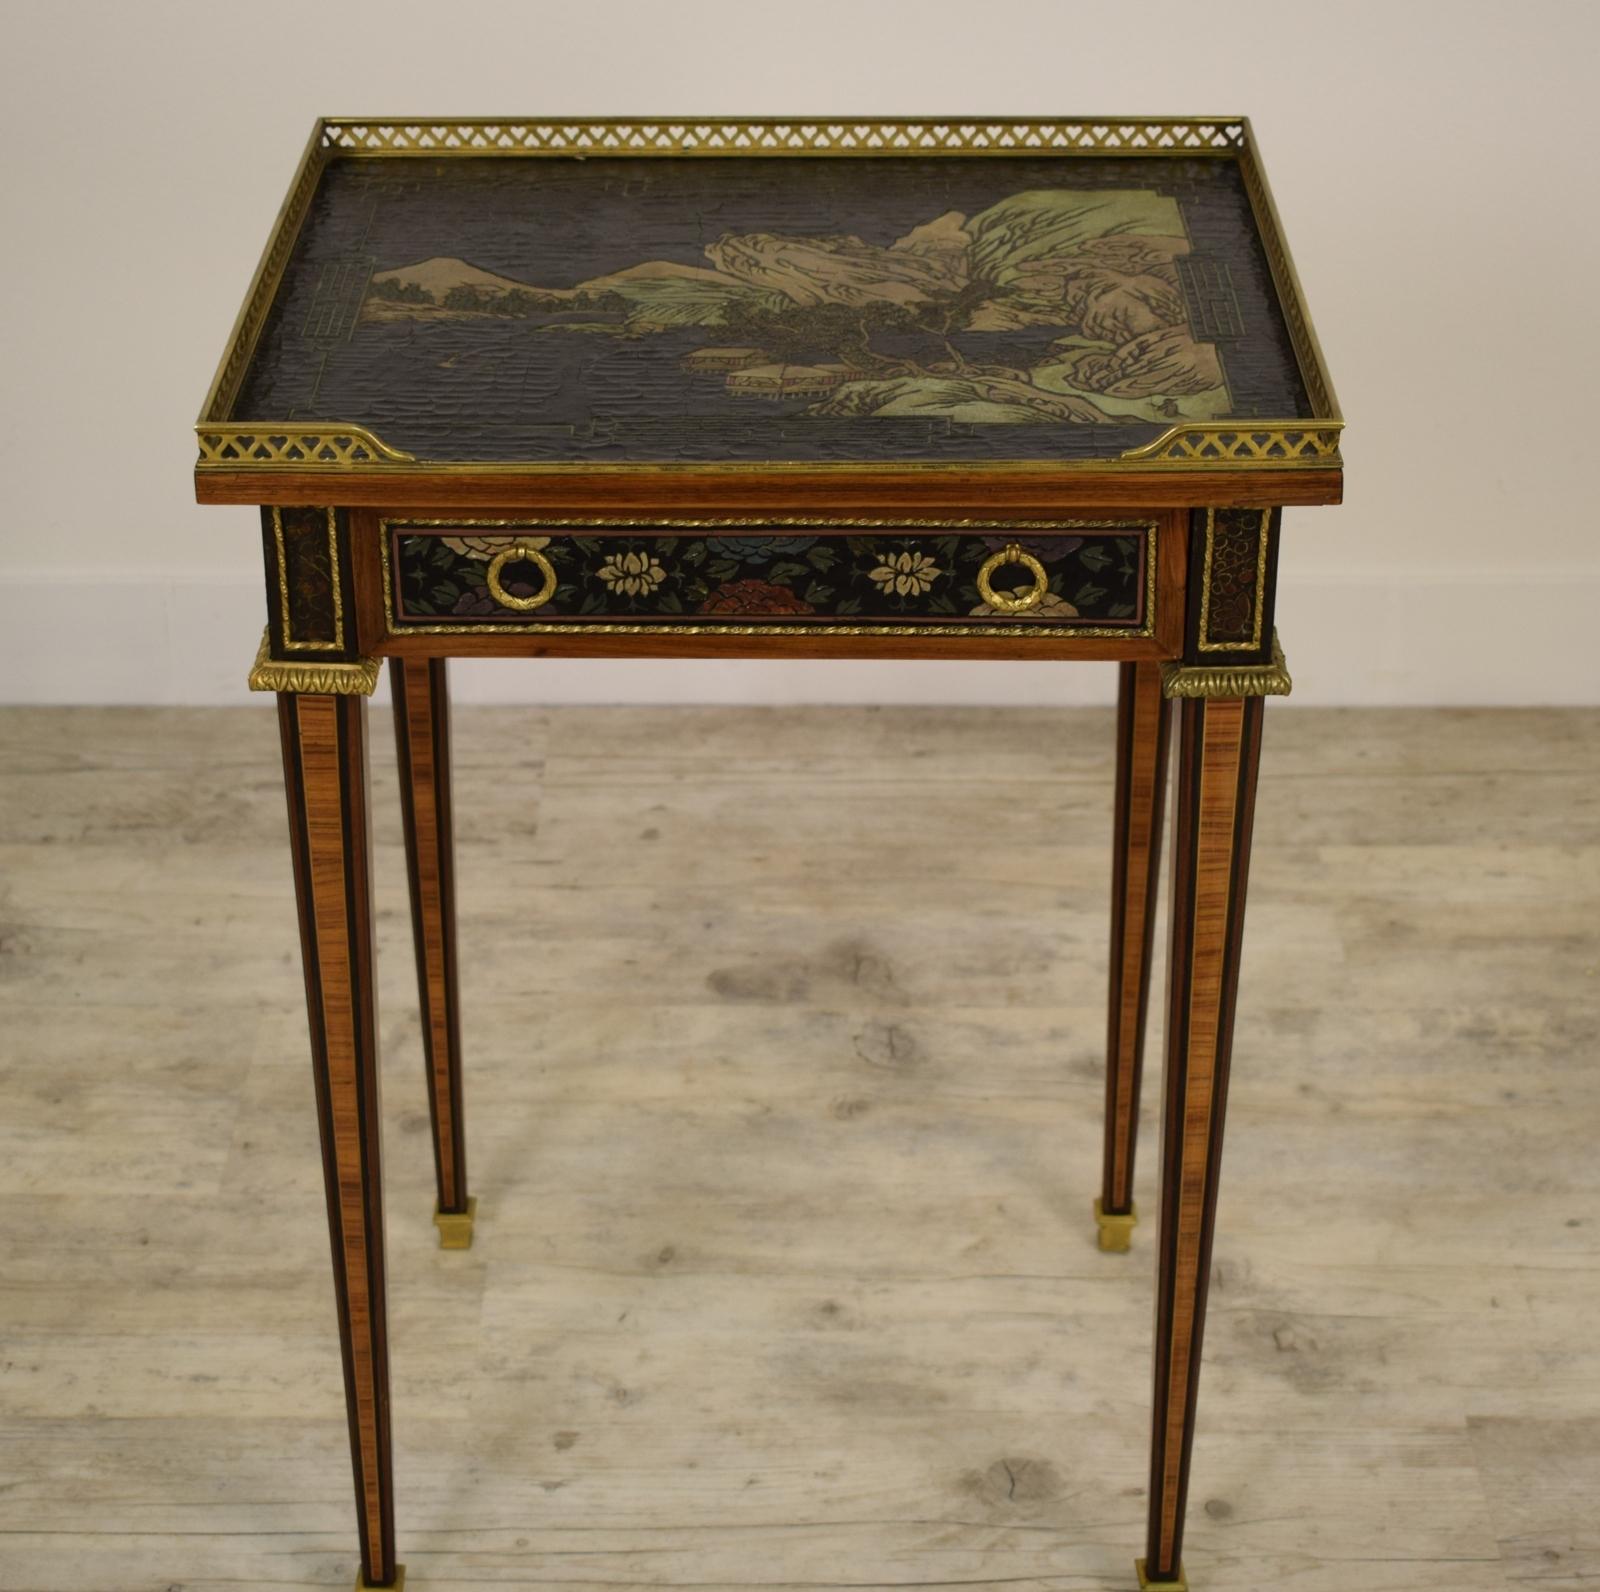 The table was made in France in the second half of the 19th century in the Louis XVI style. The wooden structure is entirely veneered and the top, as well as the band under the central and lateral top, lacquered with chinoiserie designs. On the